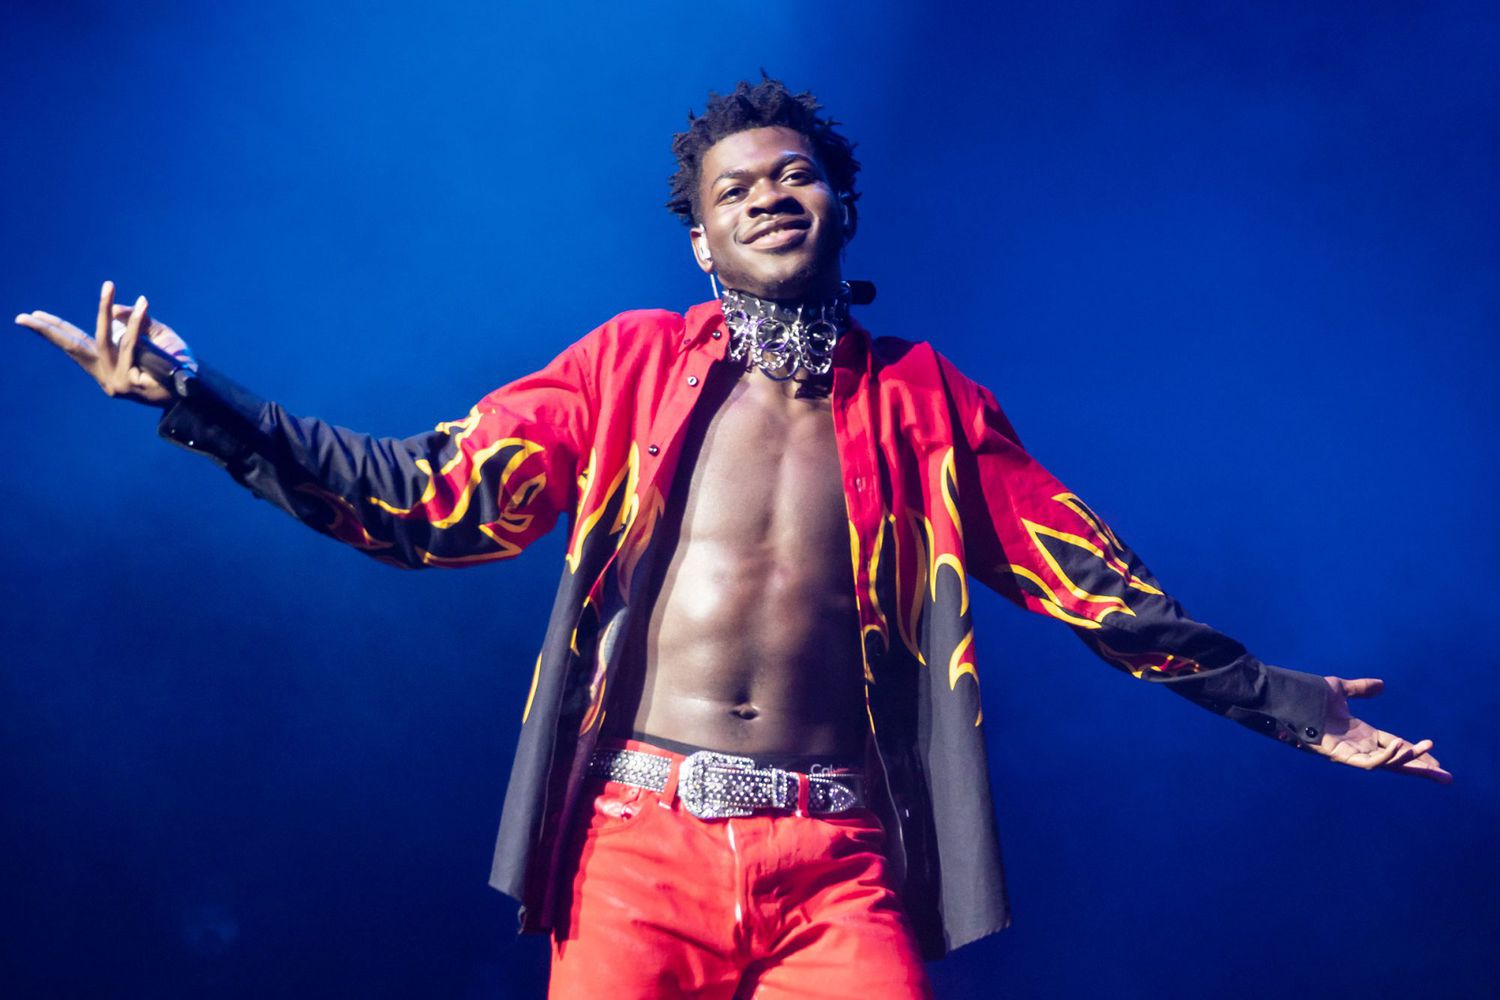 Lil Nas X performs at WiLD 94.9's FM's Jingle Ball 2019 Presented by Capital One at The Masonic Auditorium on December 08, 2019 in San Francisco, California